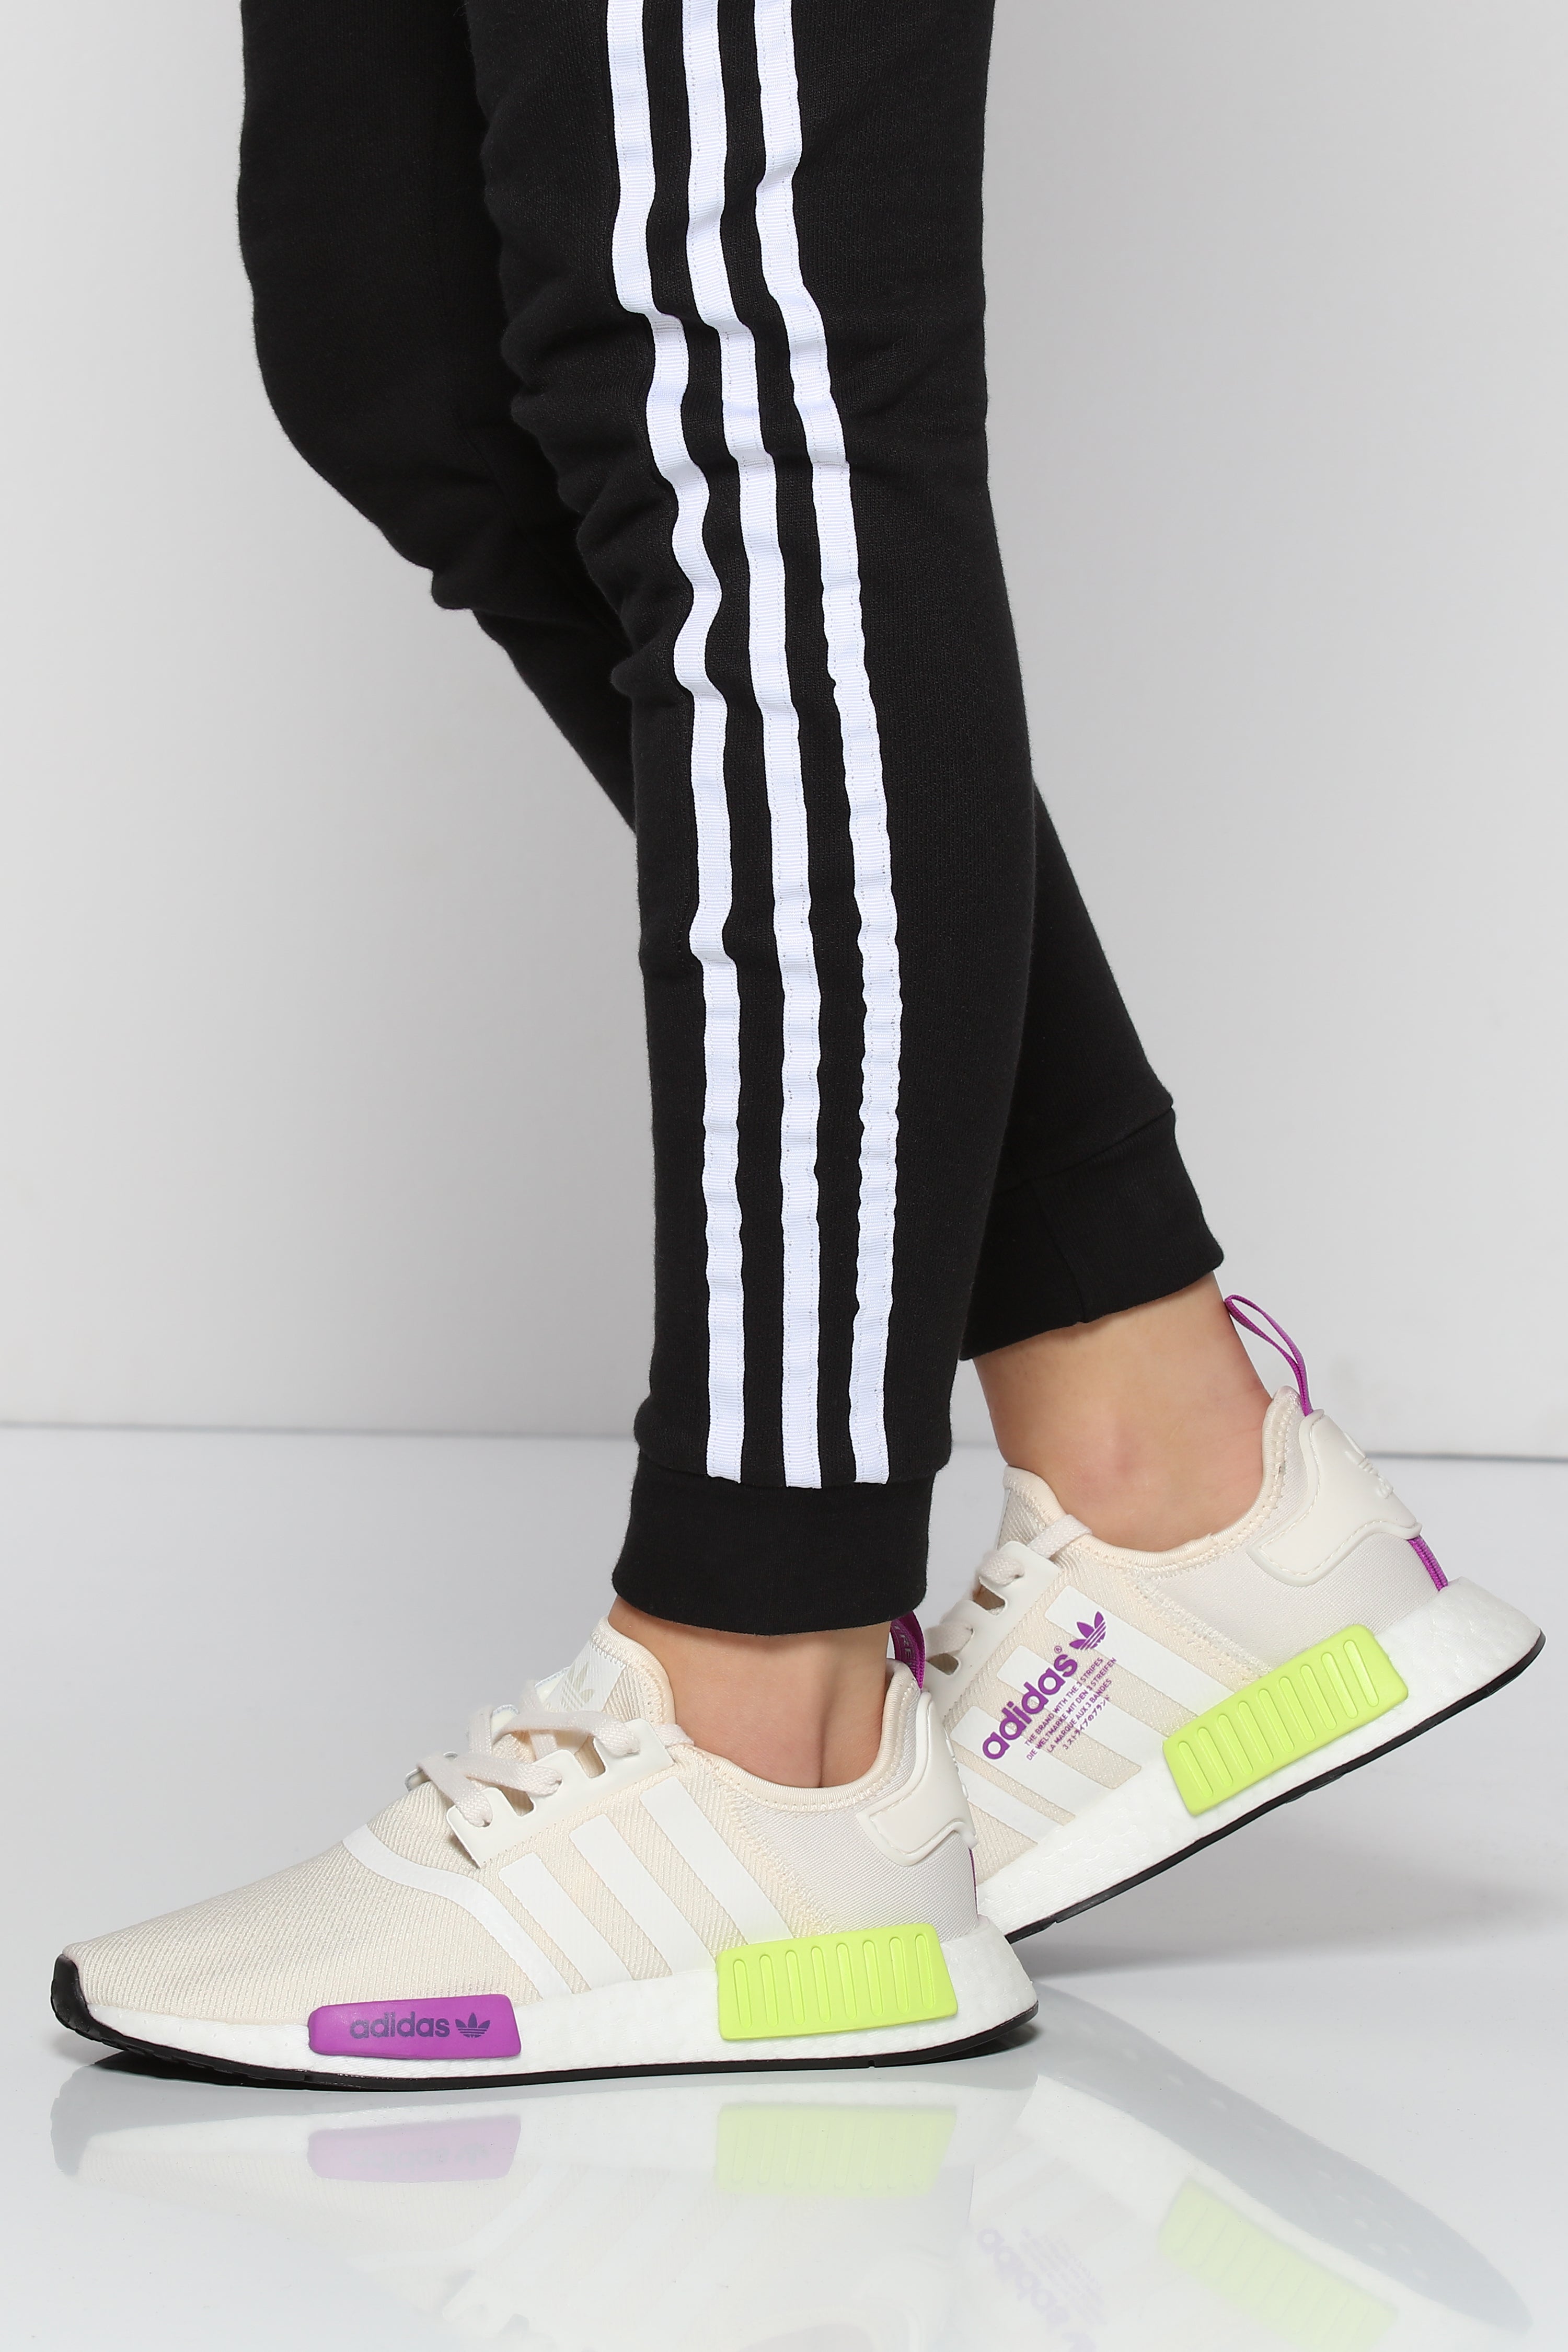 nmd r1 purple and green